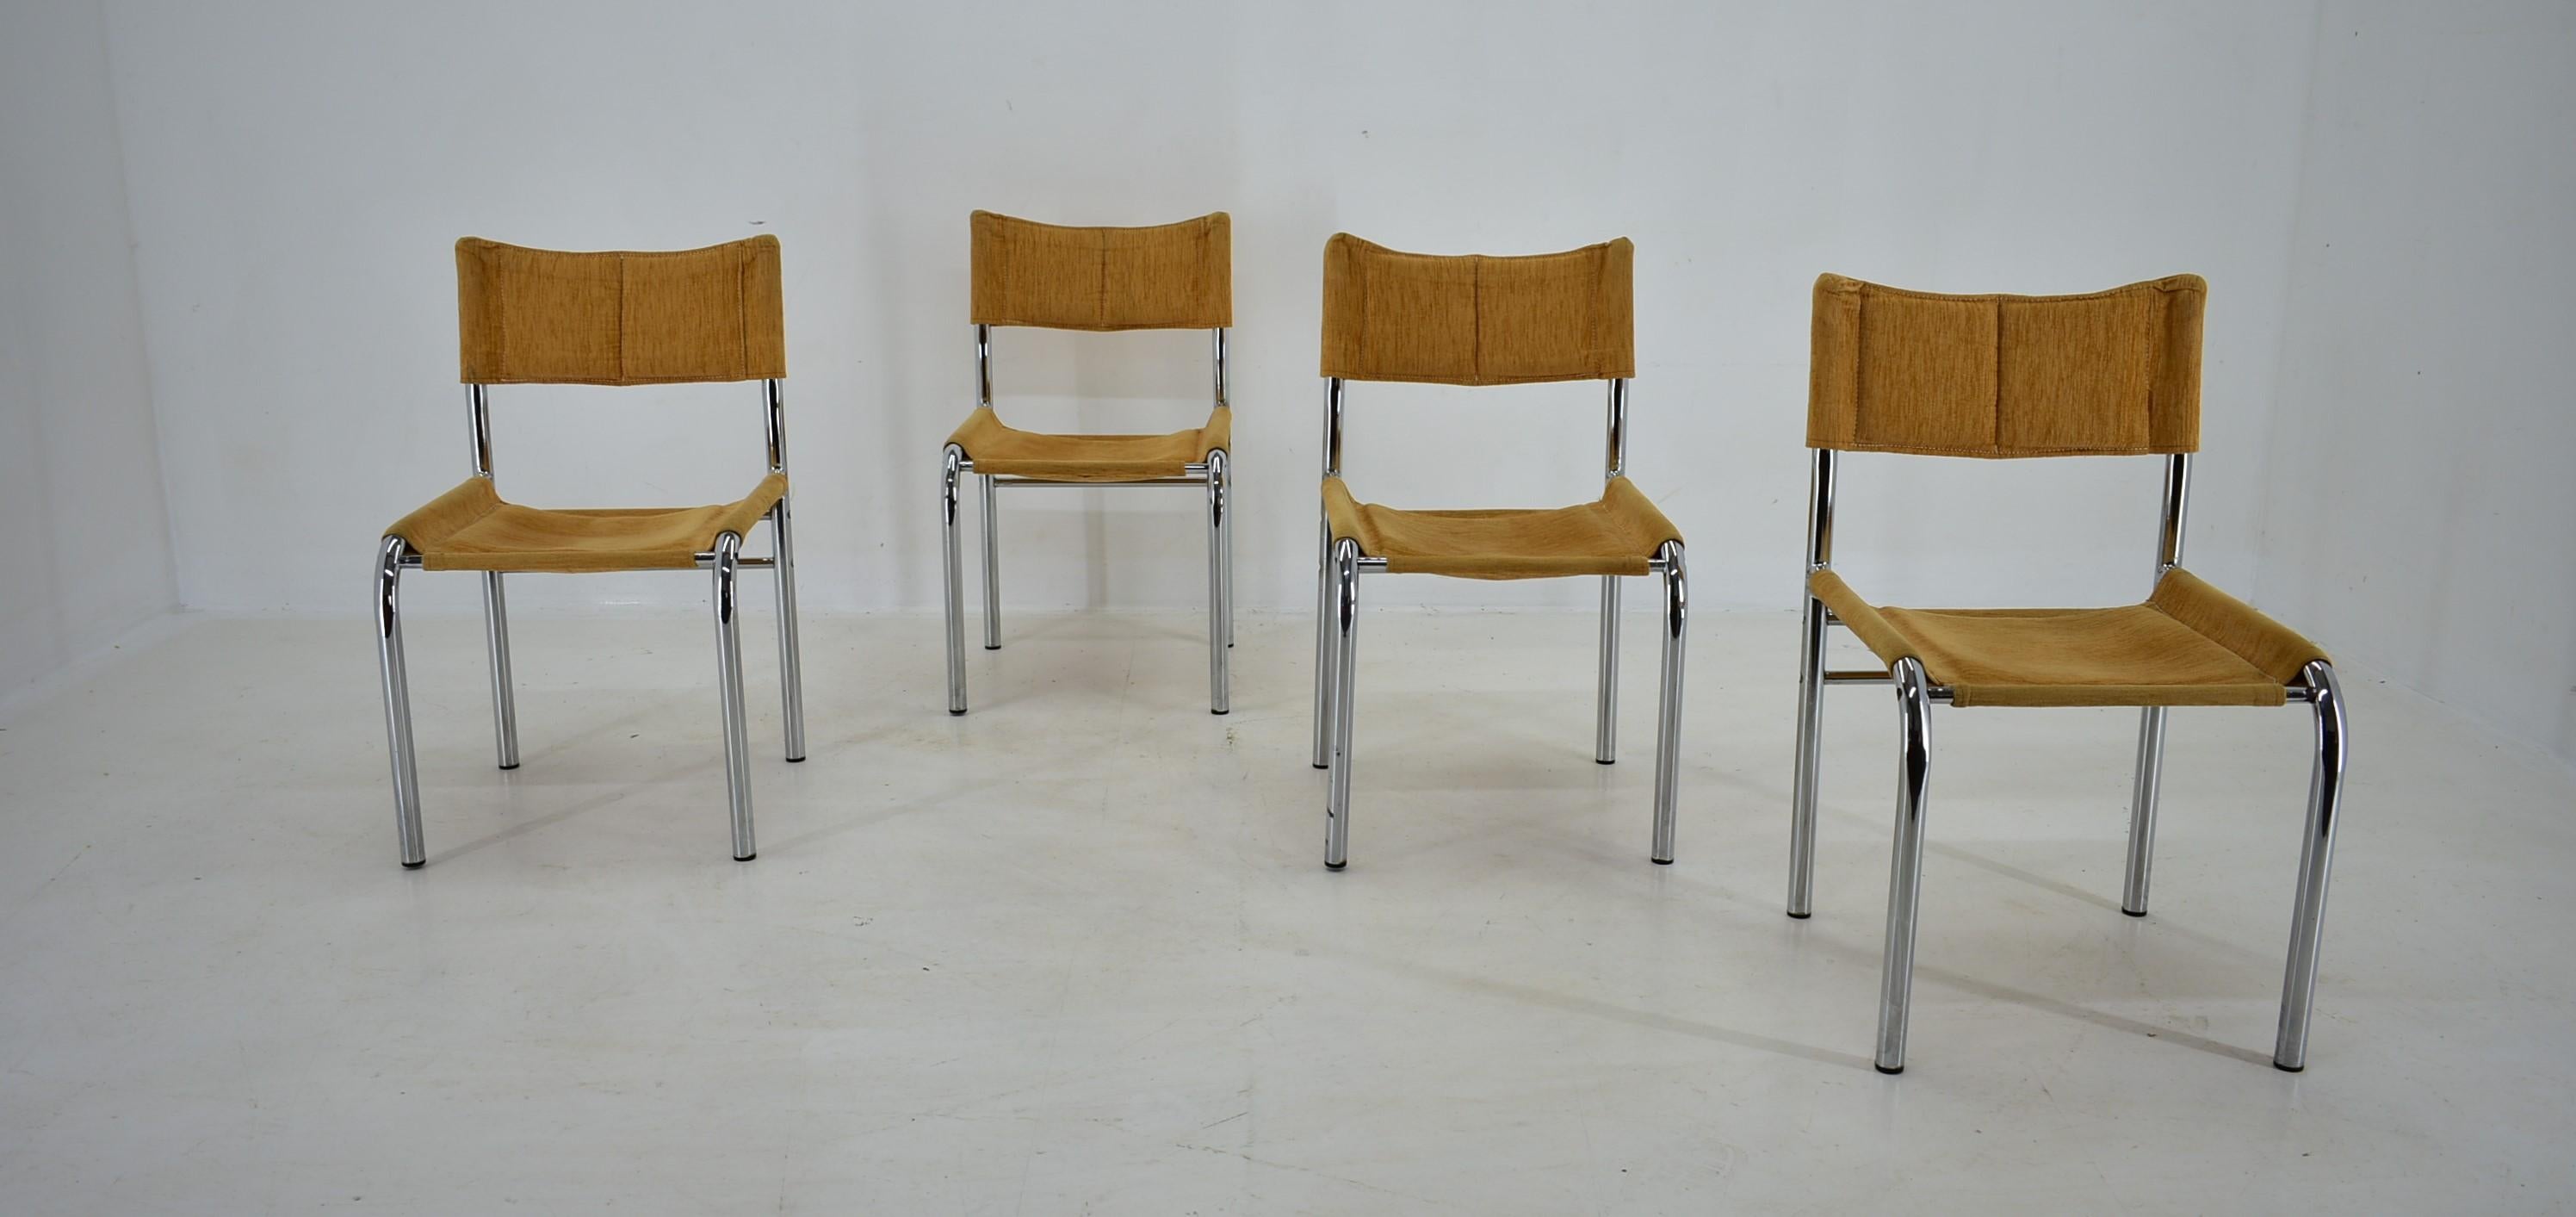 Set of Four Design Chrome Dining Chairs by Viliam Chlebo, Czechoslovakia, 1980s For Sale 7